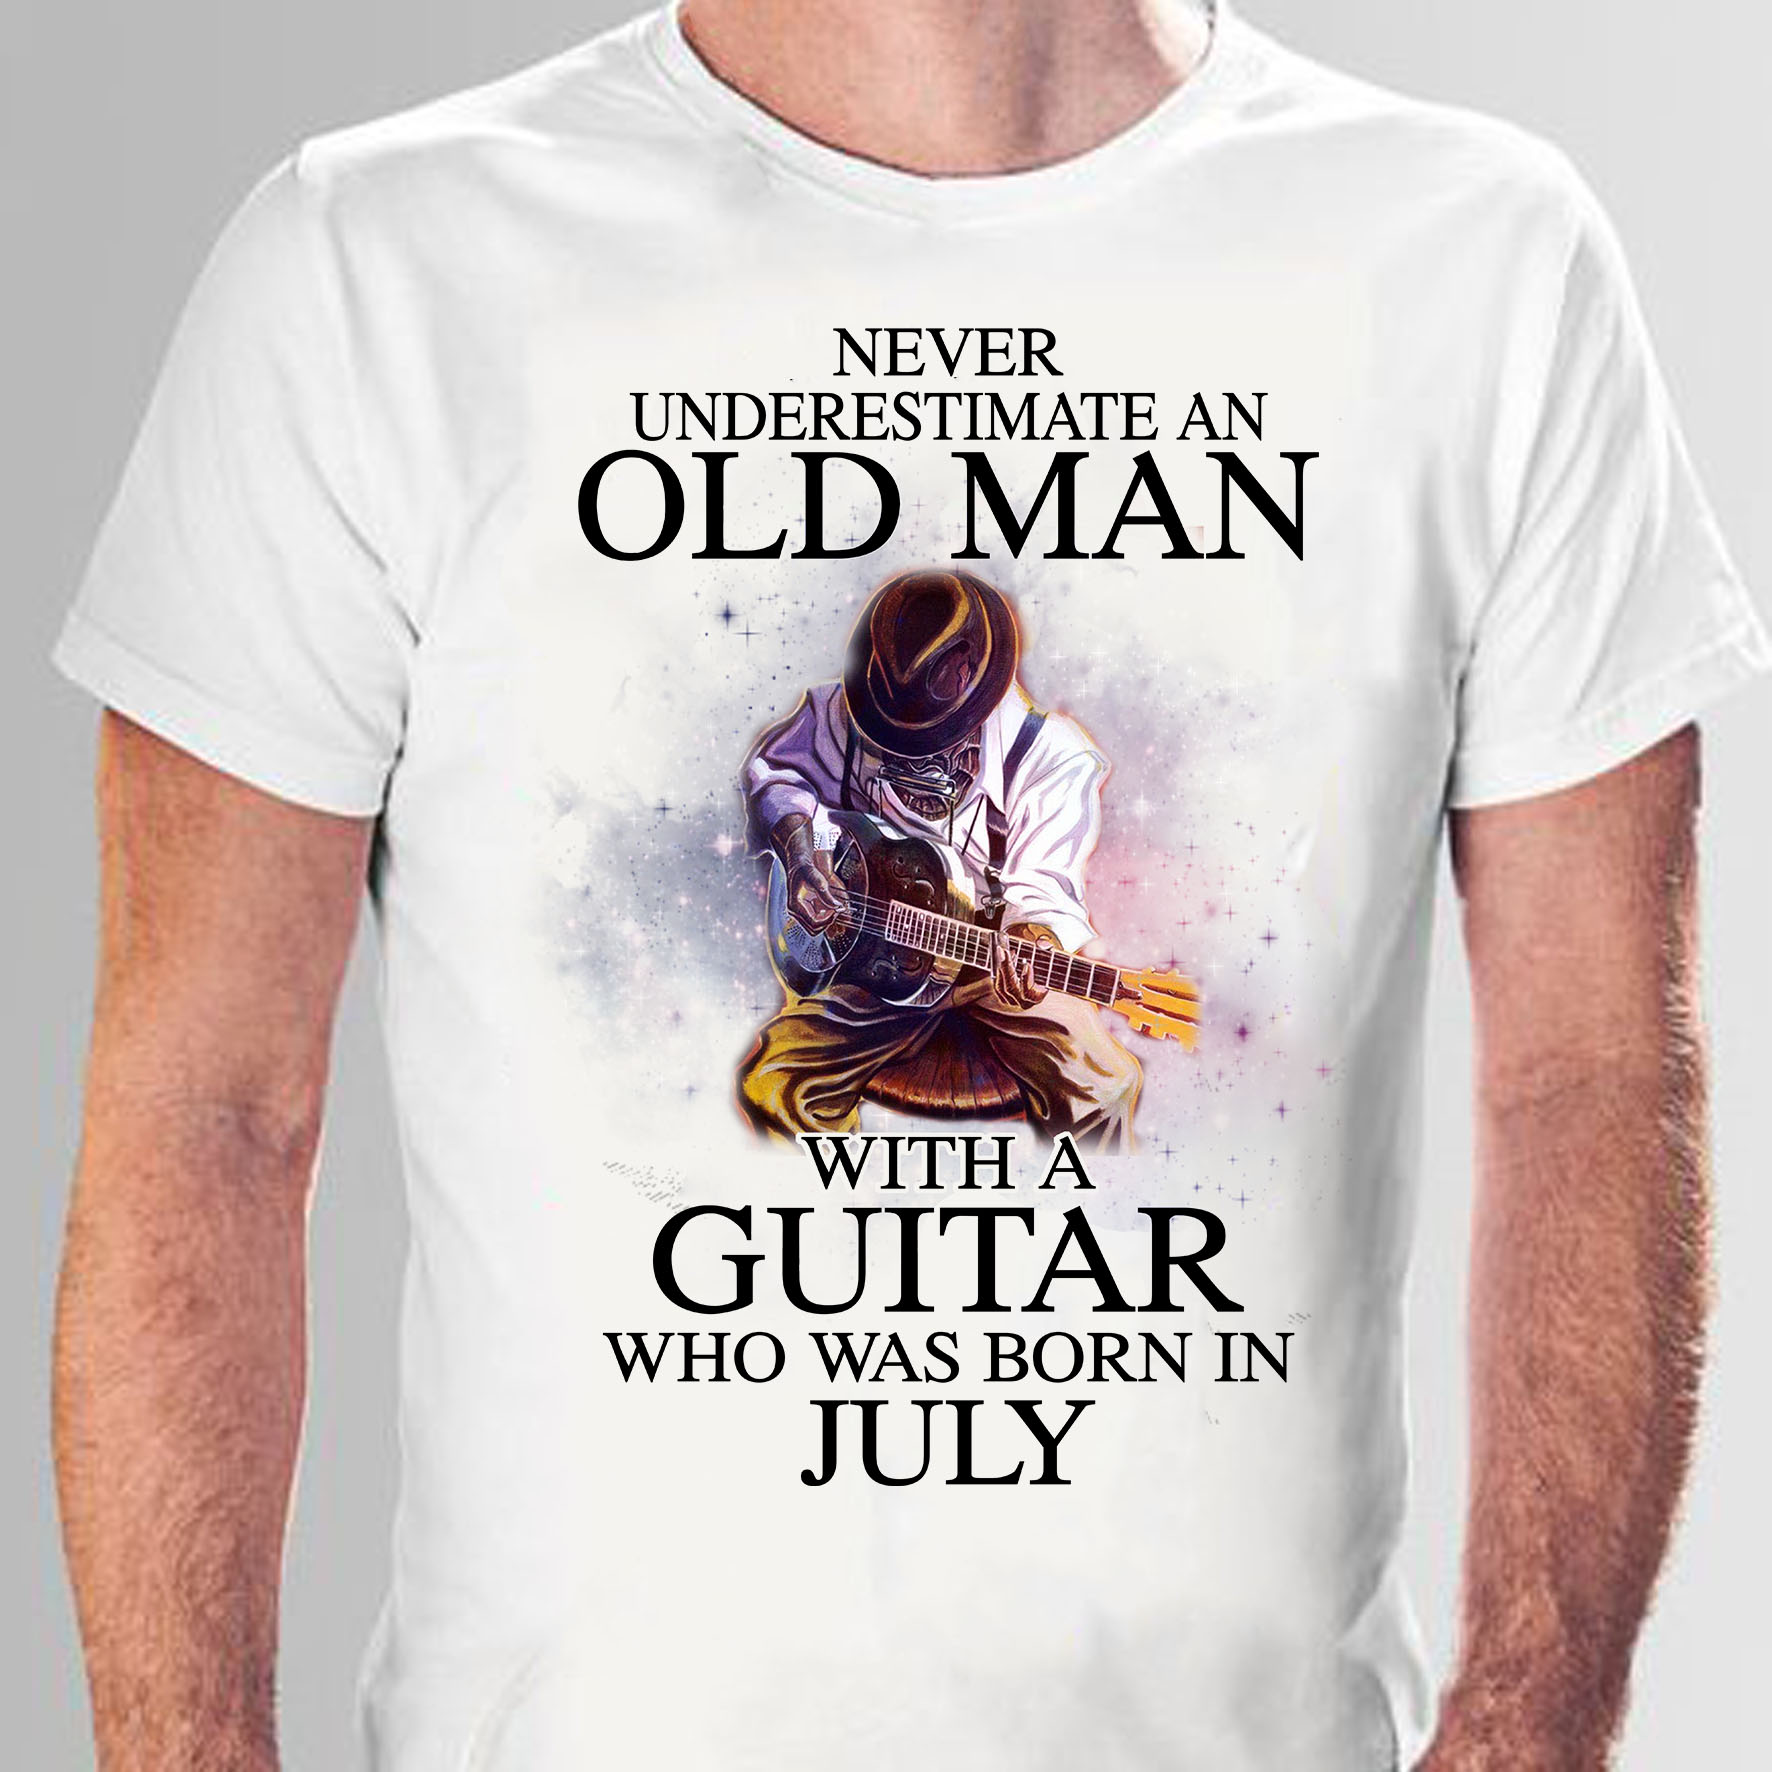 Never underestimate an old man with a guitar who was born in July - Guitarist